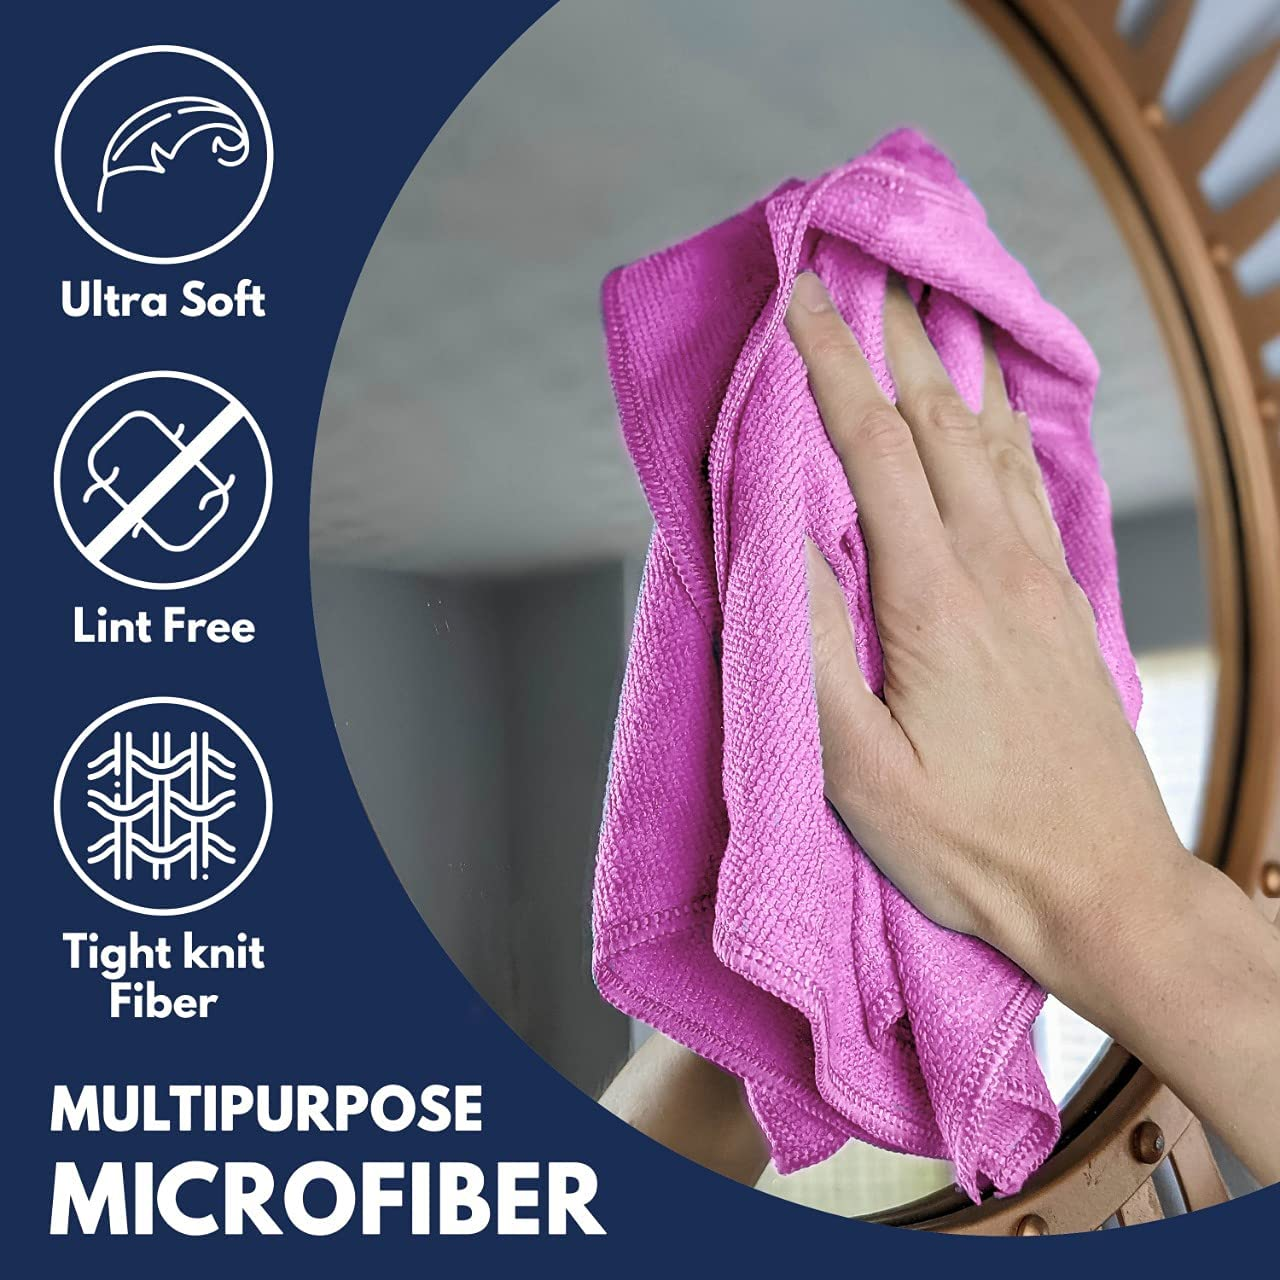 USANOOKS Microfiber Cleaning Cloth - 50 Pcs (12X12 In) - Cleaning Rags - Microfiber Towels for Cars - Softer and More Absorbent - Lint Free Cloth